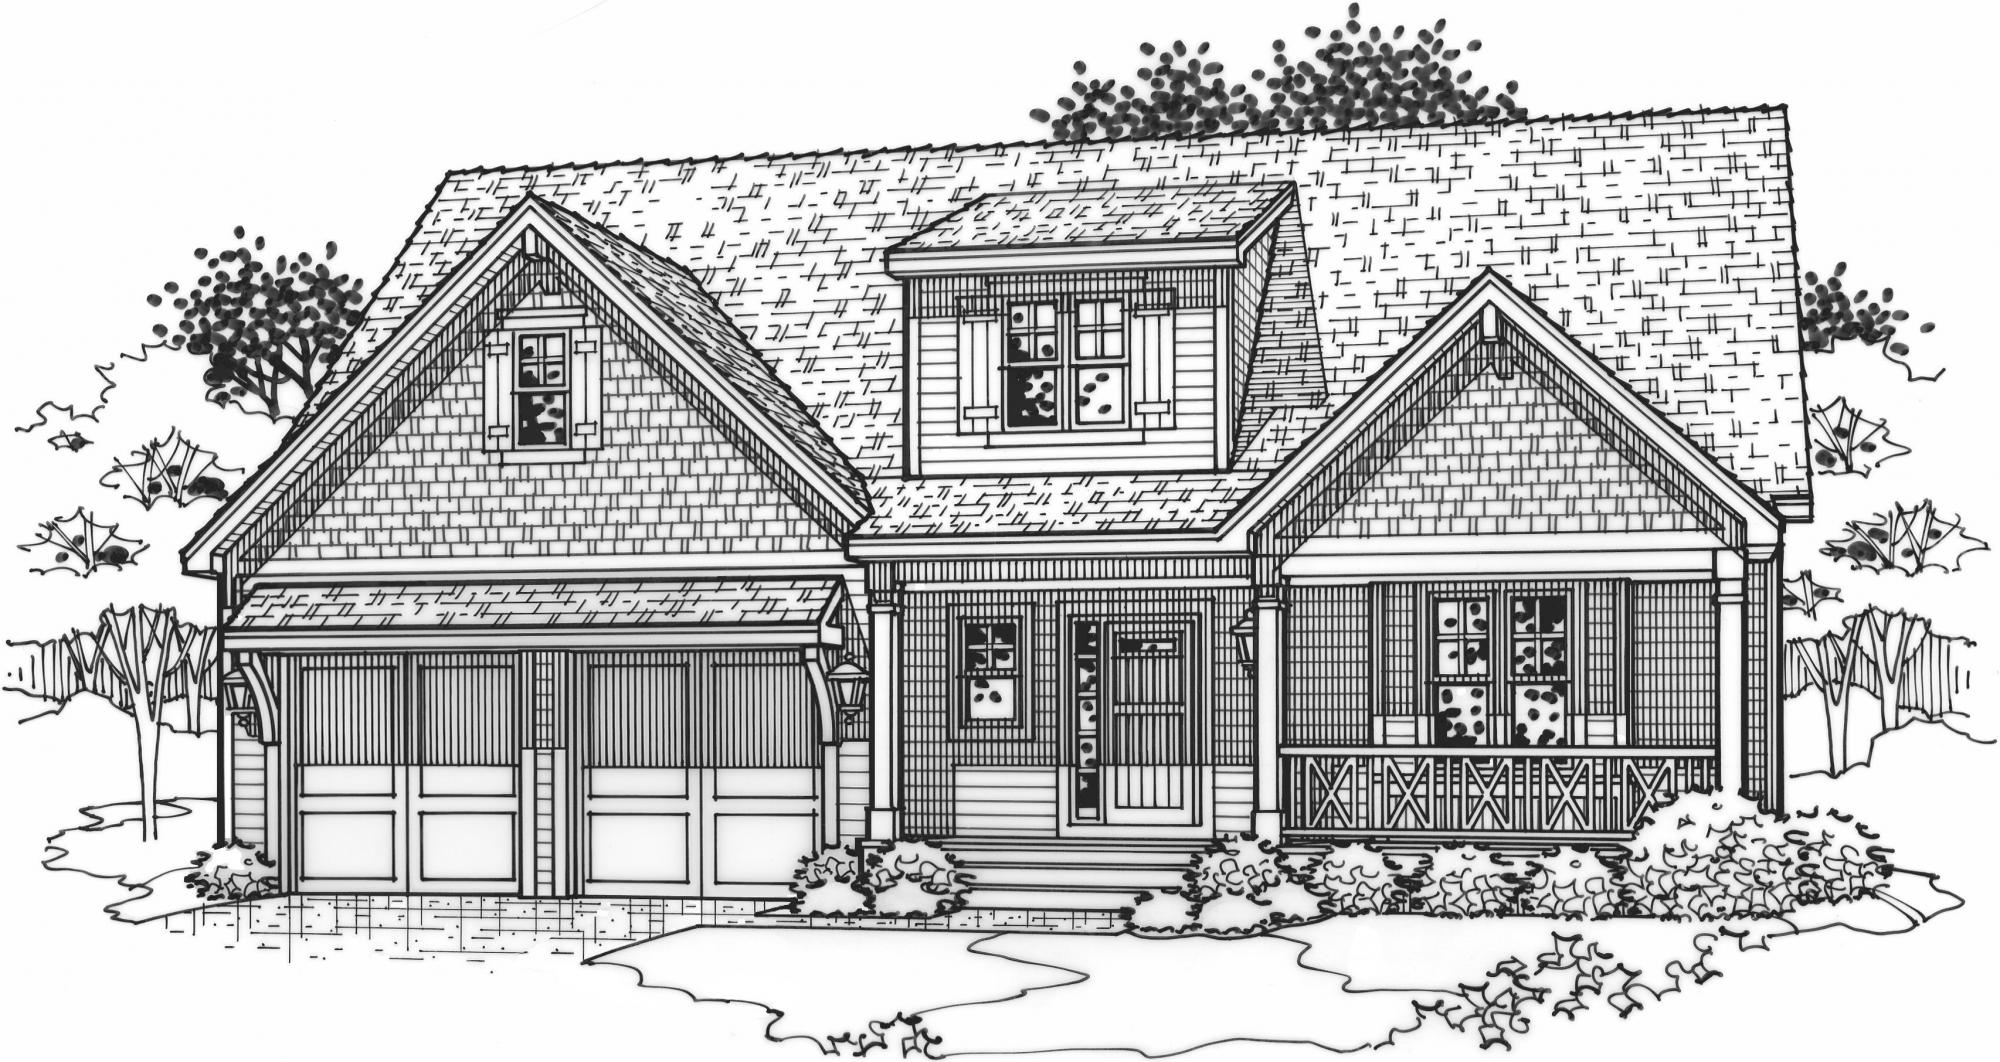 black and white rendering of a persimmon model from Lambie custom homes